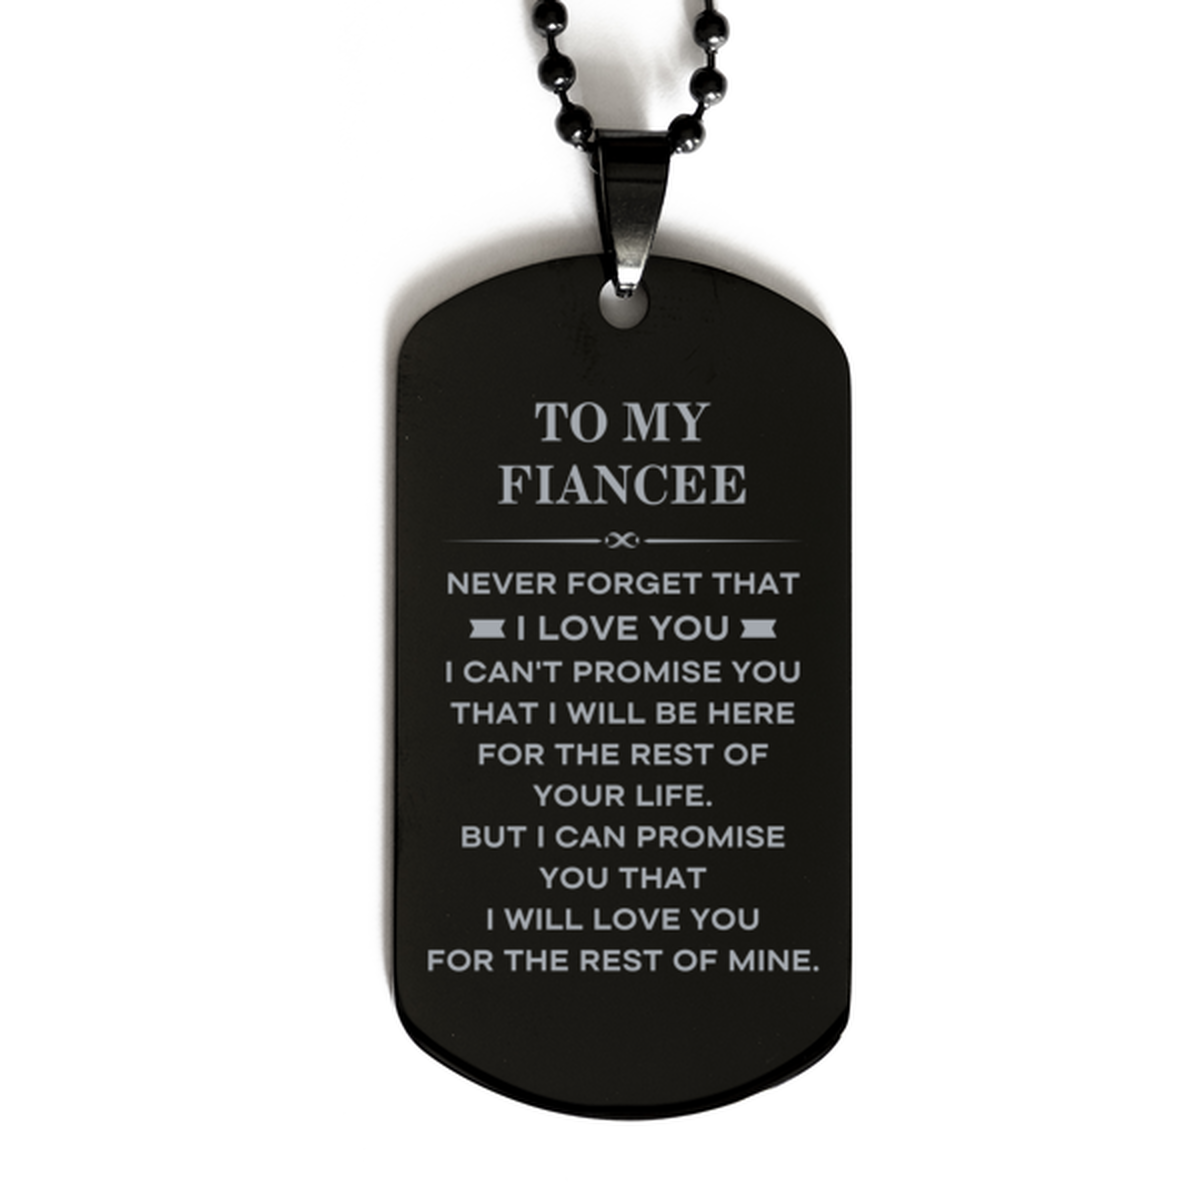 To My Fiancee Gifts, I will love you for the rest of mine, Love Fiancee Dog Tag Necklace, Birthday Christmas Unique Black Dog Tag For Fiancee